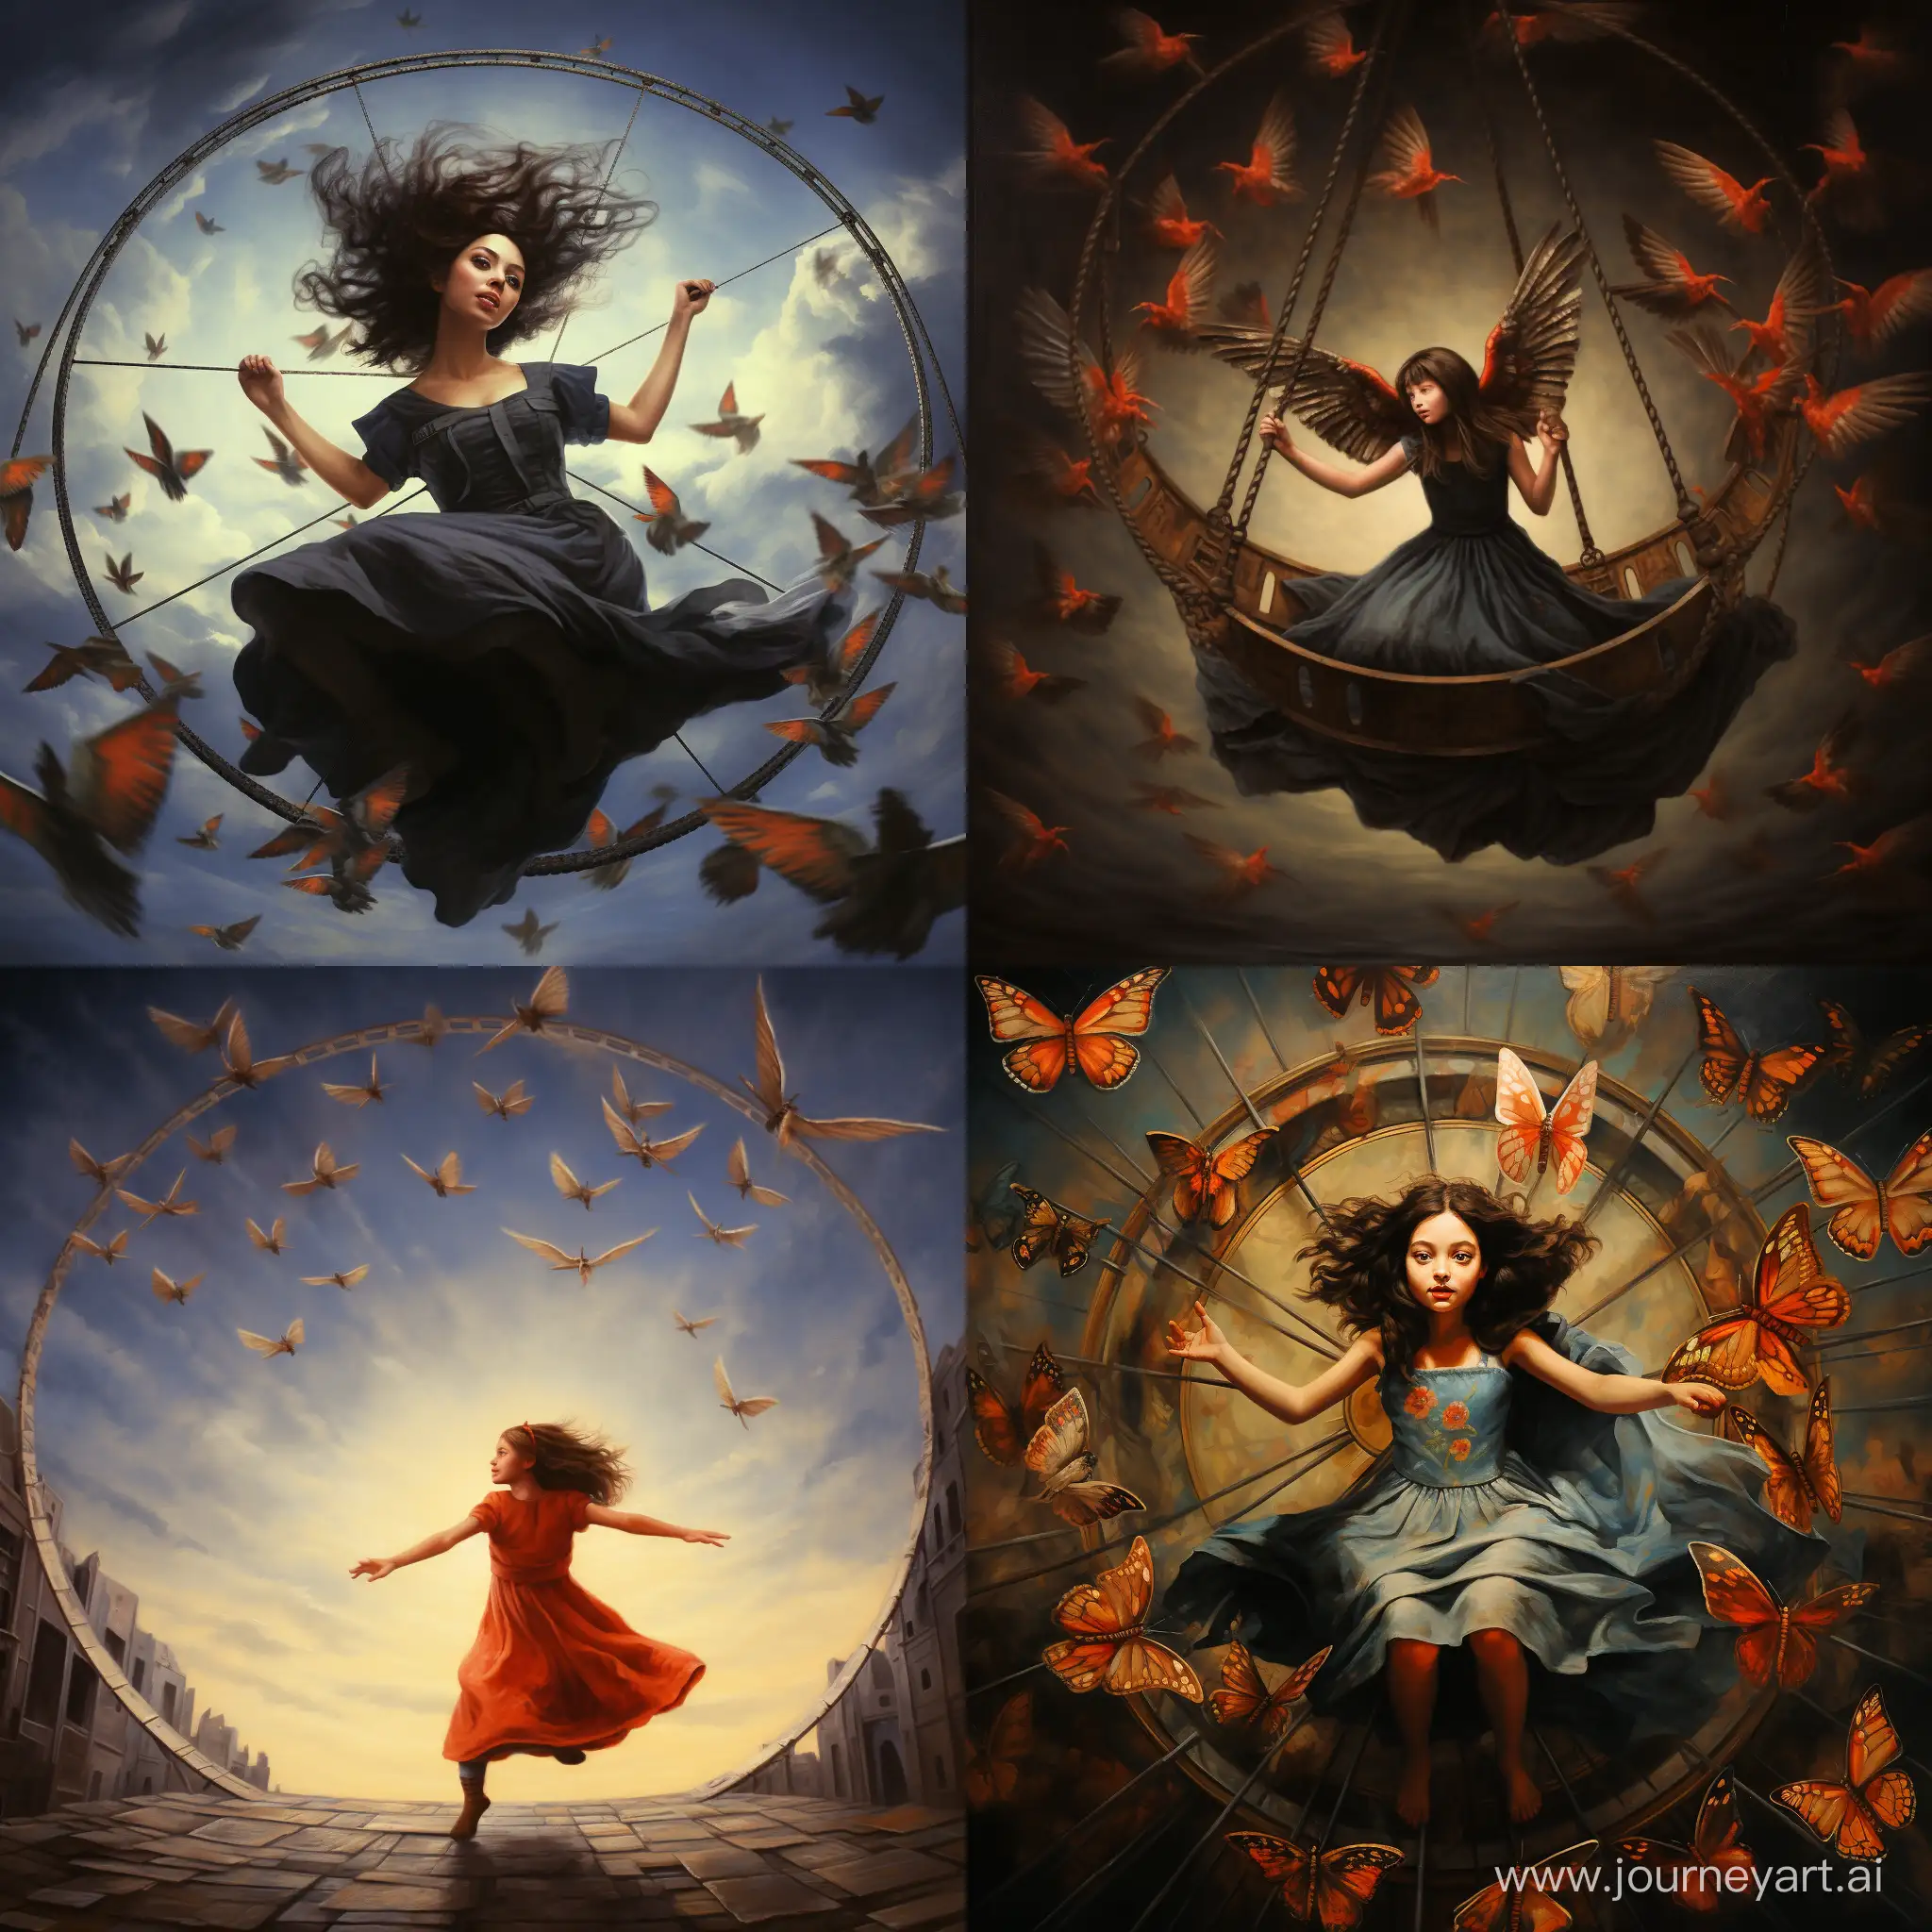 Whirling-Dancer-in-Mesmerizing-Spin-AR-11-Image